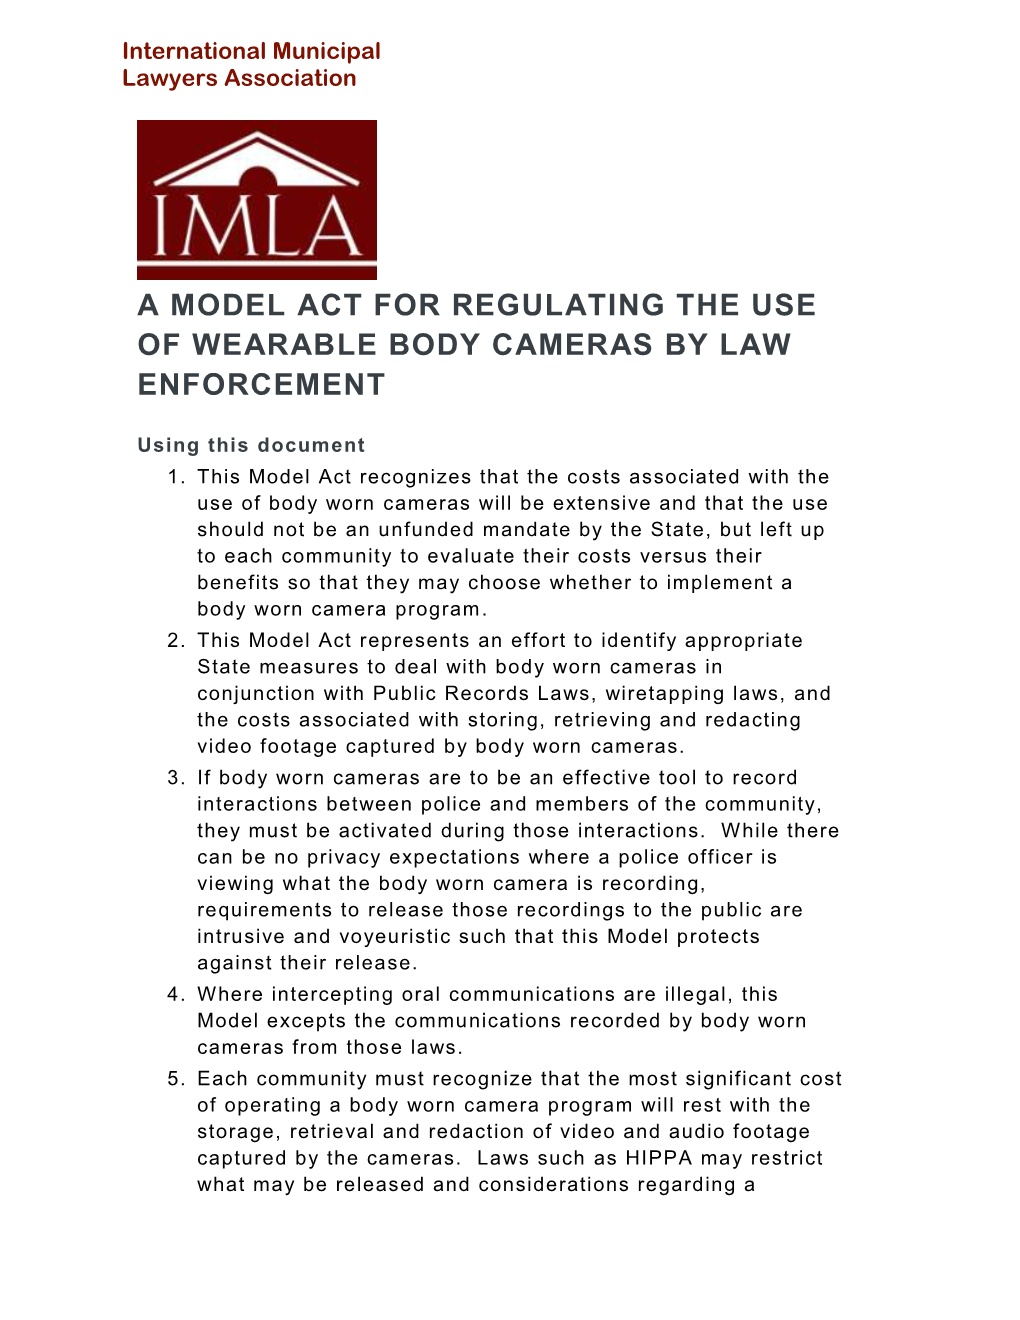 A Model Act for Regulating the Use of Wearable Body Cameras by Law Enforcement